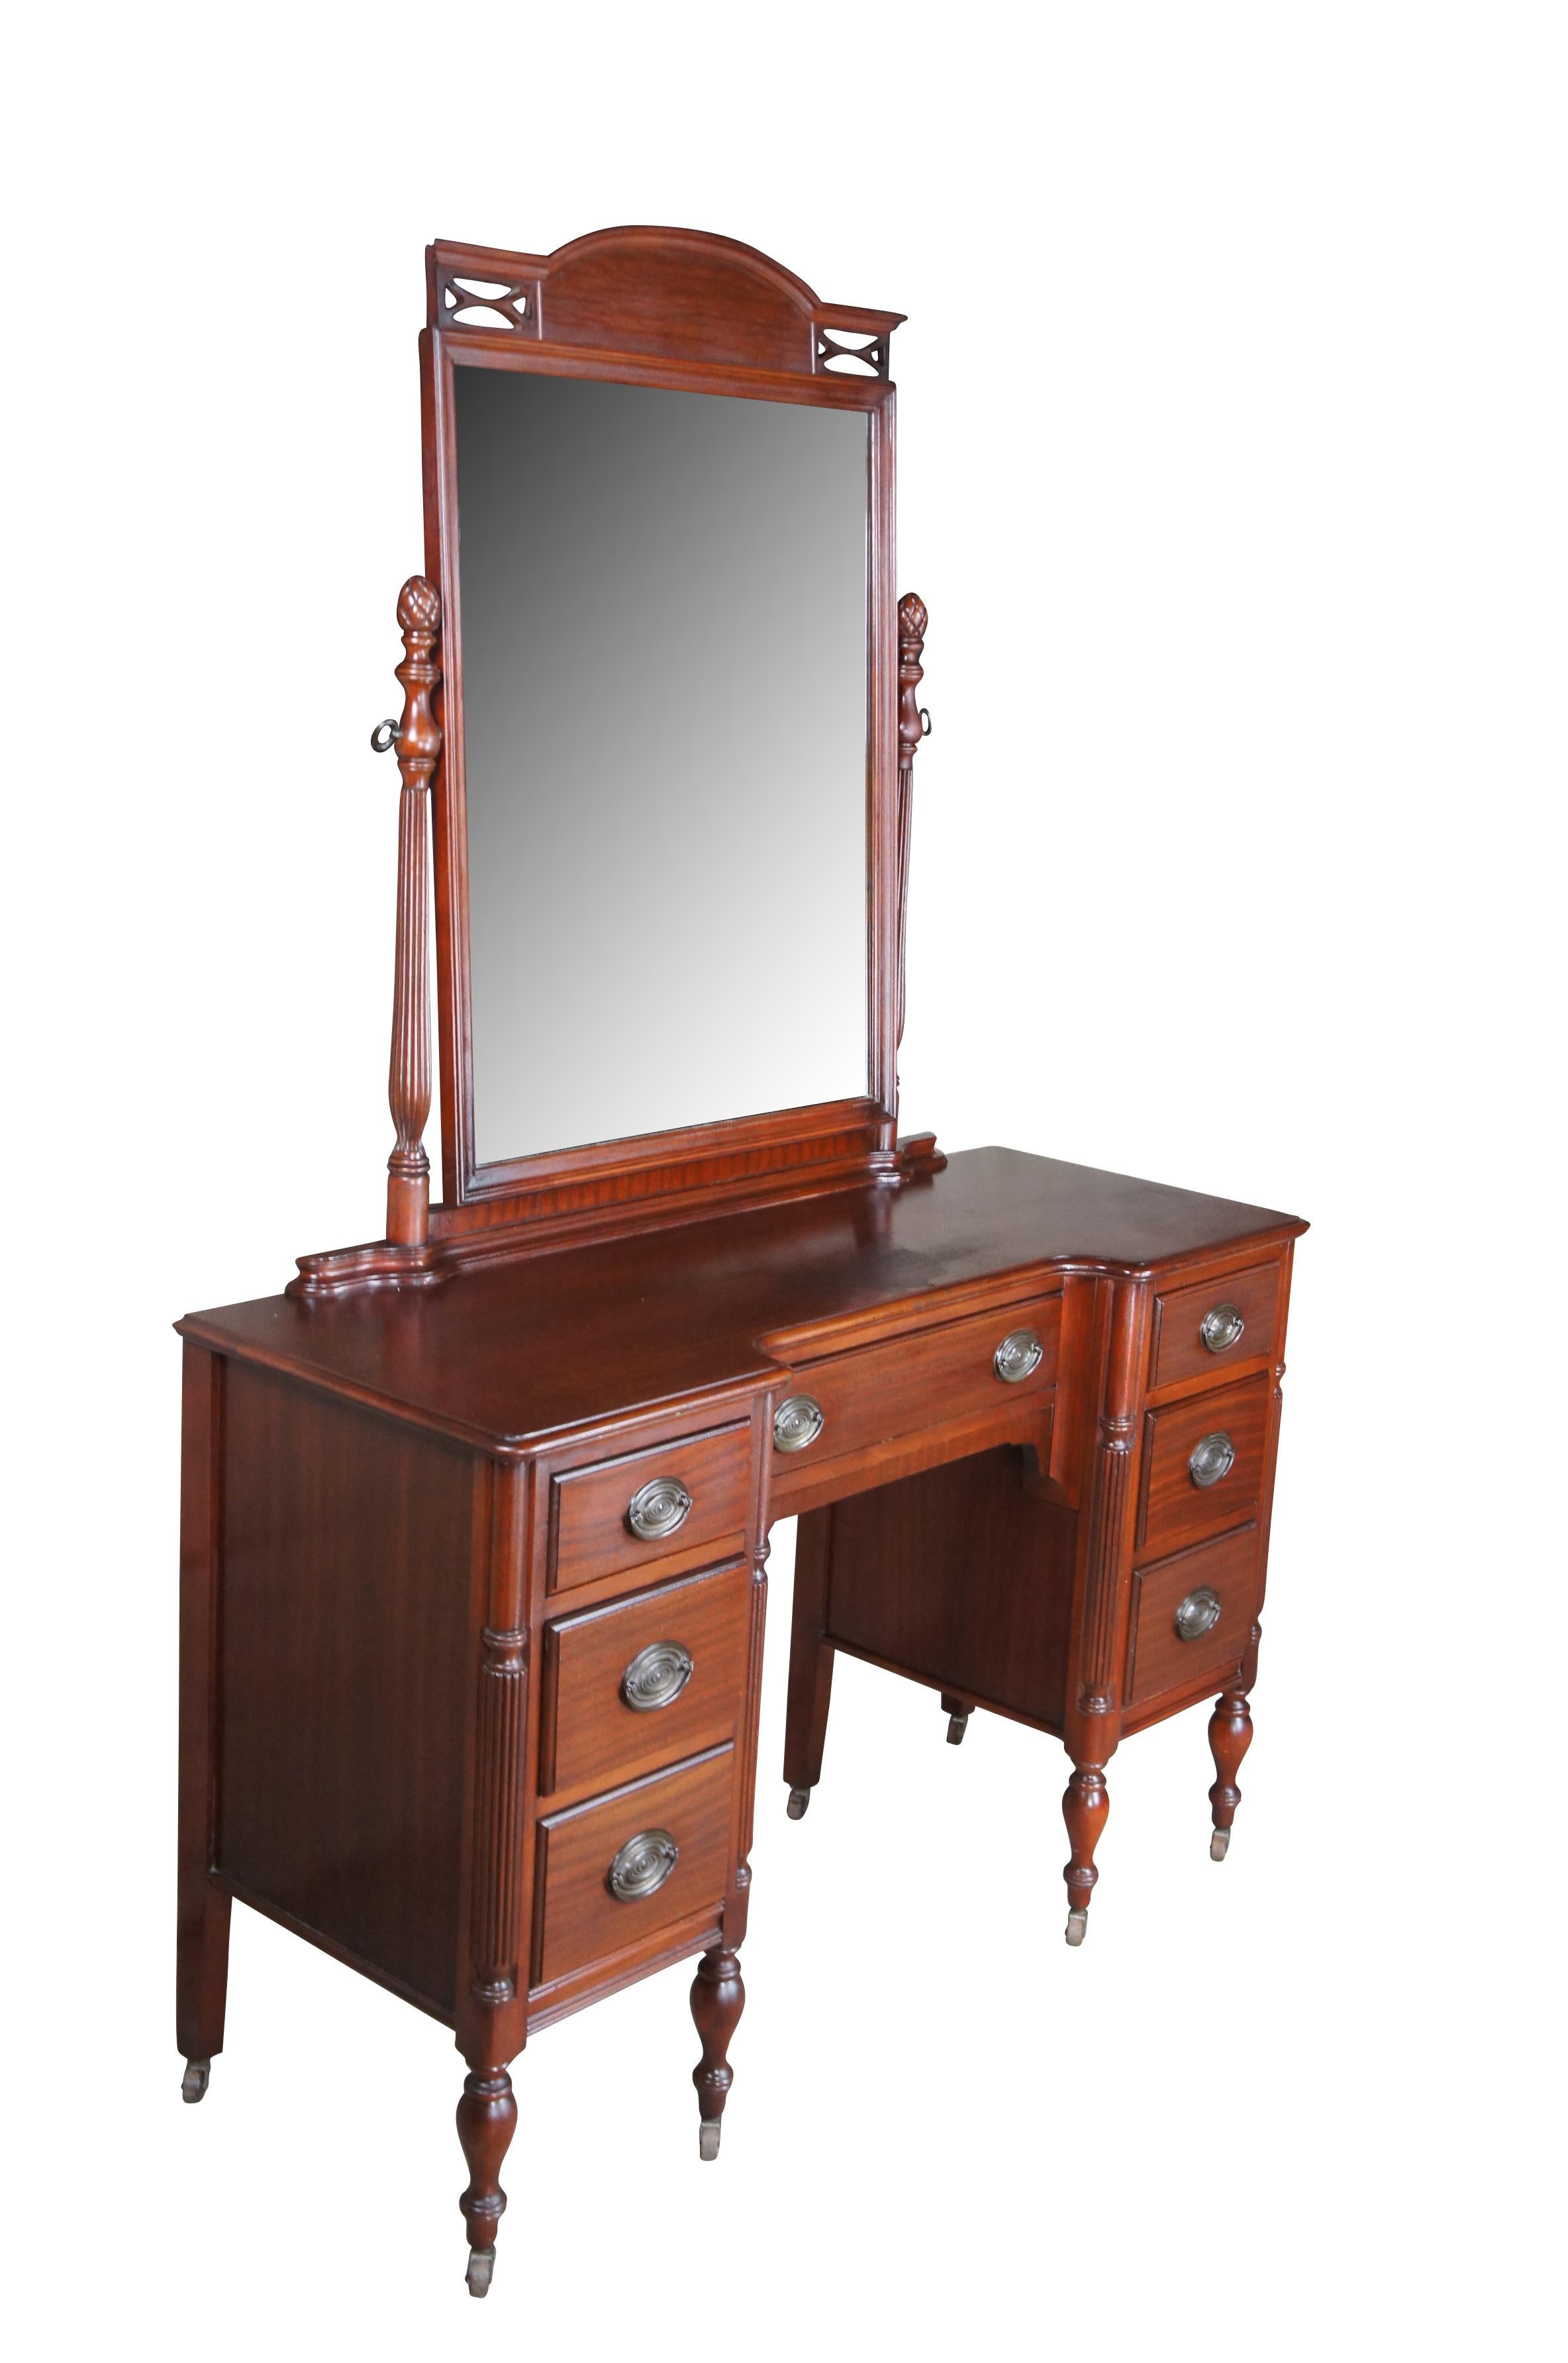 Antique vanity desk or dressing table.  Made of mahogany featuring rectangular form with seven drawers over eight turned legs with swivel castors, and upper mirror with reticulated crown flanked by fluted pineapple posts.


DIMENSIONS

48